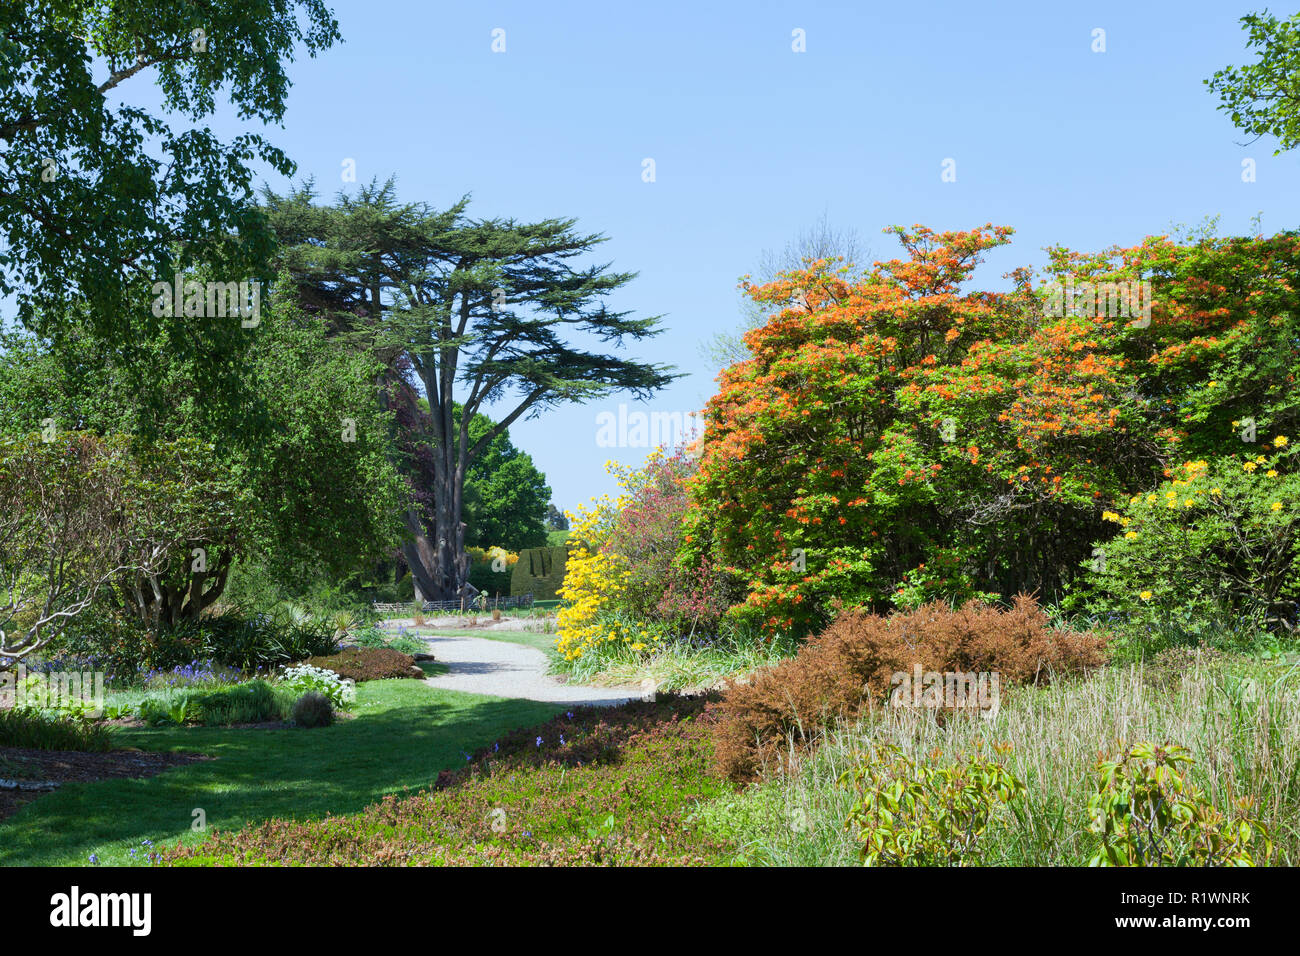 Park with flowering colorful azalea and rhododendron plants, spring flowers, mature trees, on a sunny day . Stock Photo